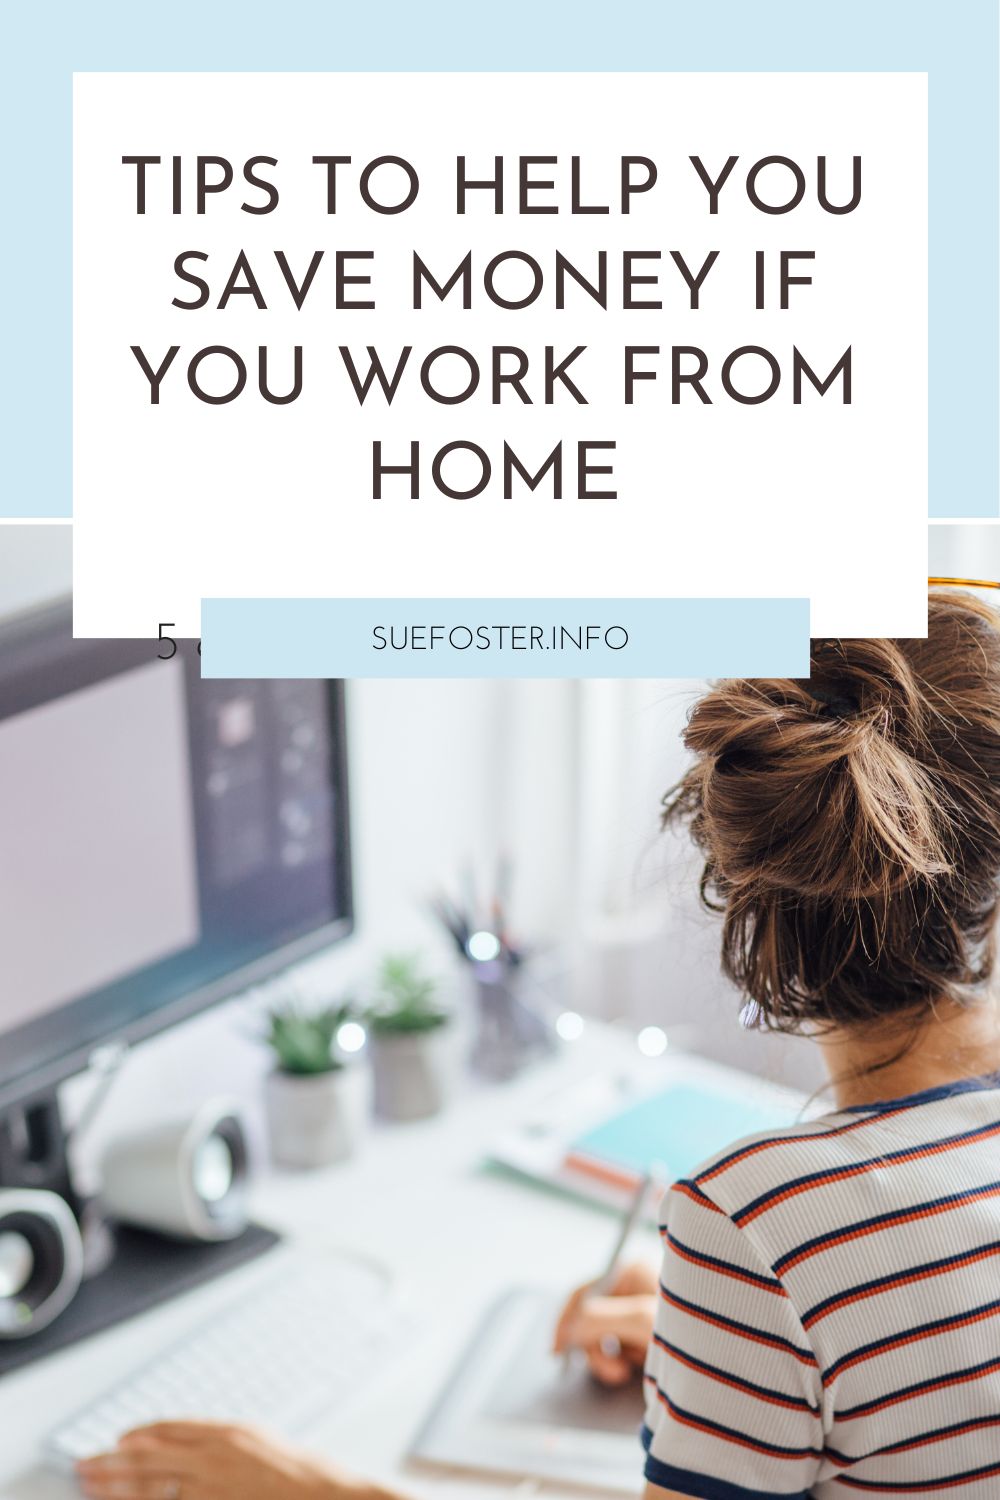 Ways to save money and make your home working arrangement more financially successful and sustainable.